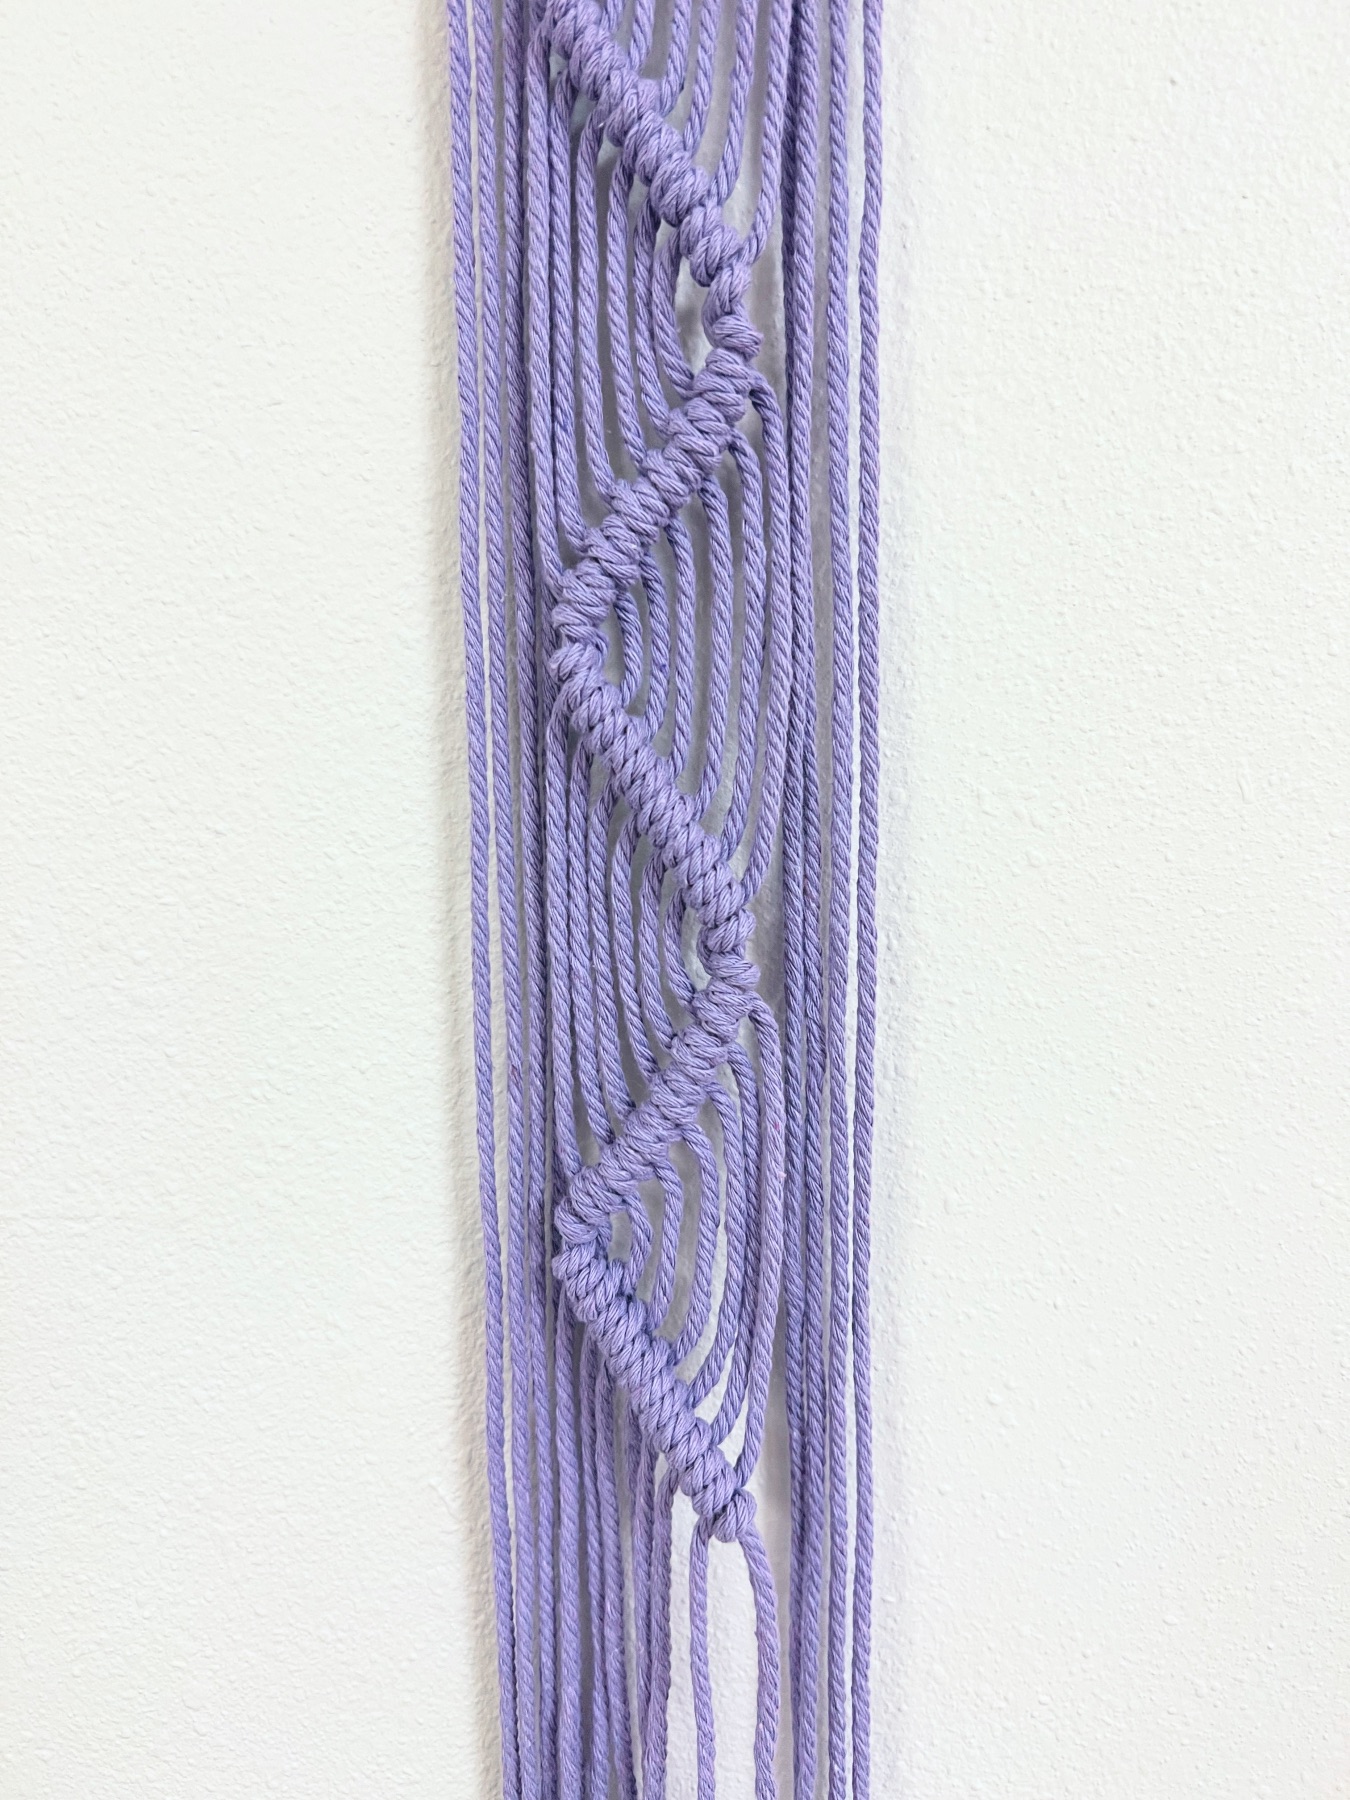 lower half of the star macrame wall hanging